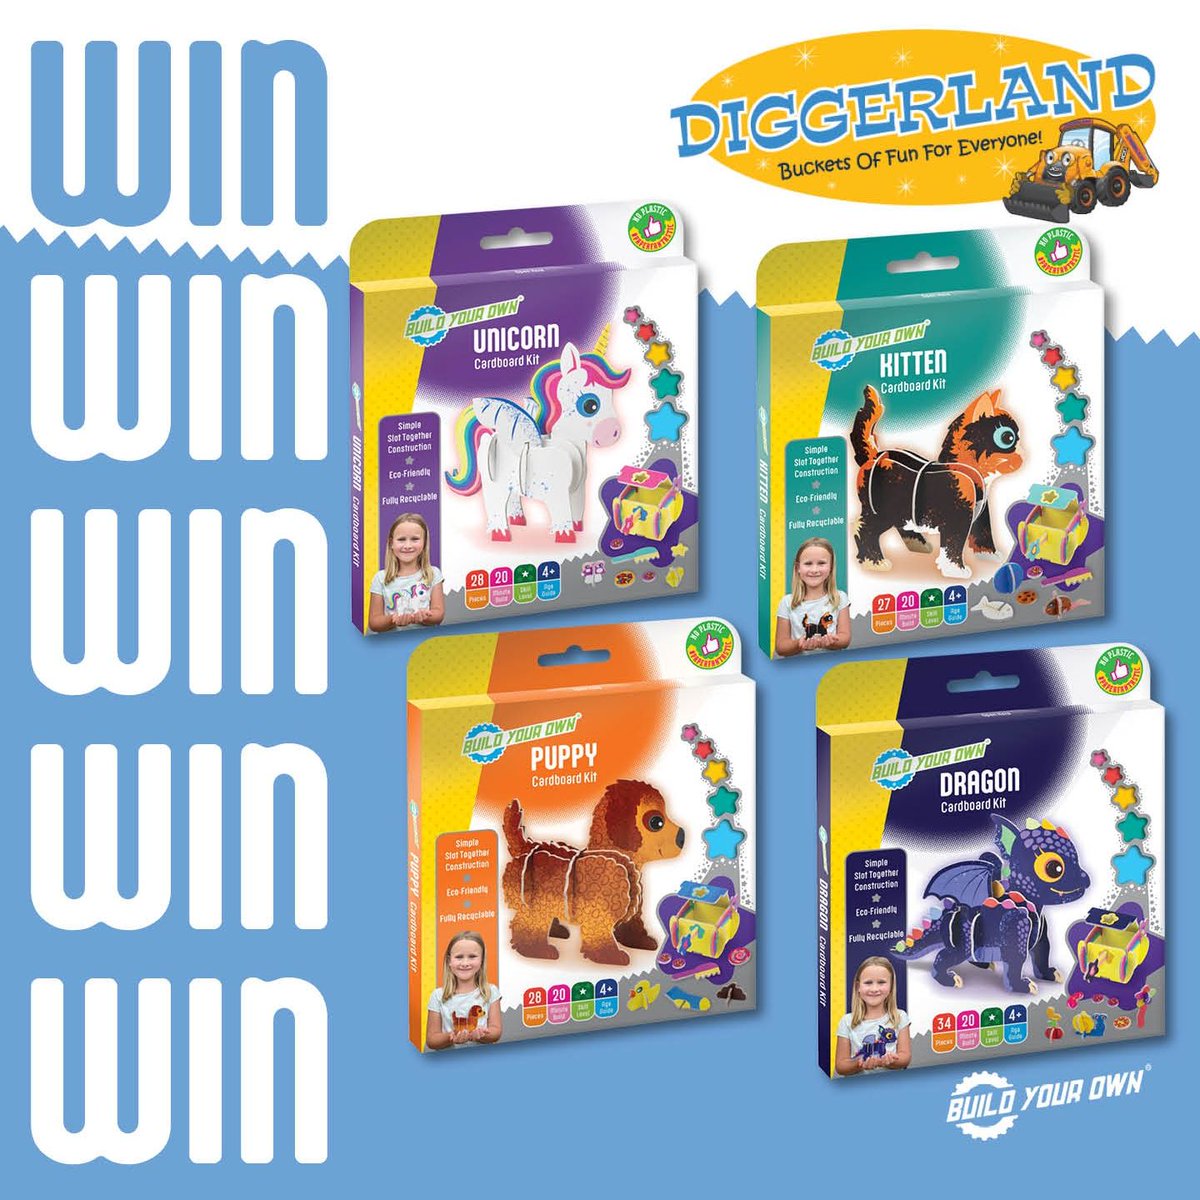 We’ve teamed up with @diggerland.uk to give you the chance to WIN our awesome Junior Builder kits 🎉 👉 Head on over to Diggerland’s competition page – diggerland.com/prize-draw/ - to enter today. Competition closes Wed 31st January 2024. #diggerland #newyeargiveaway #stemtoys